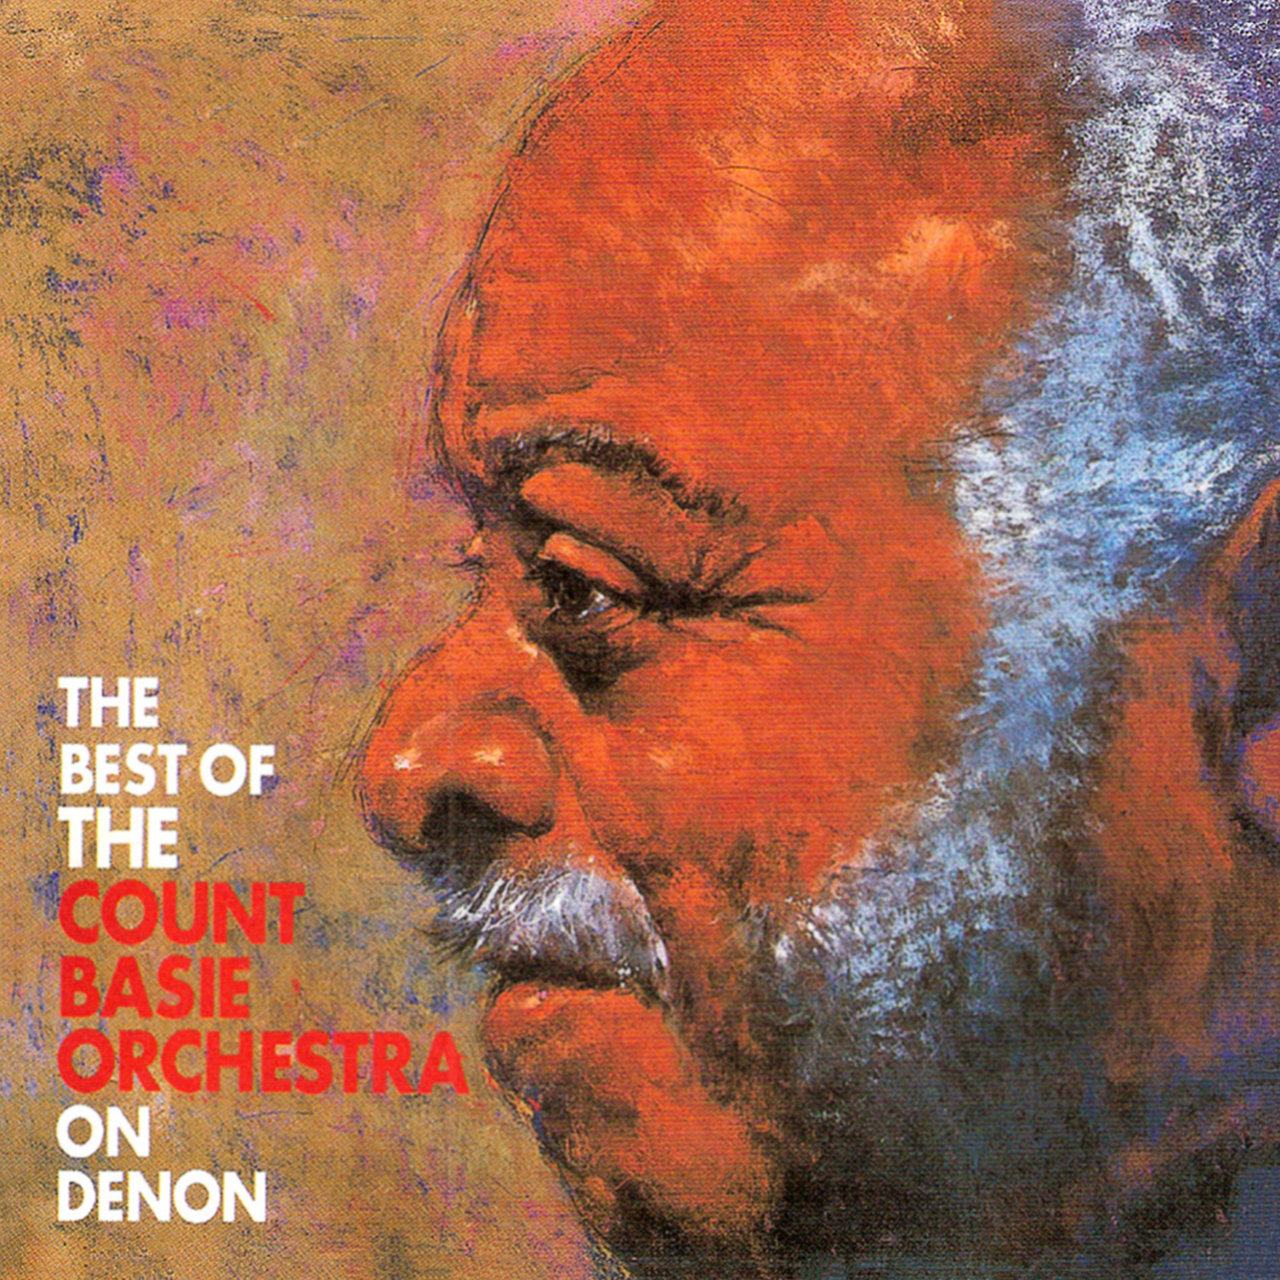 The Best Of The Count Basie Orchestra On Denon [1995]